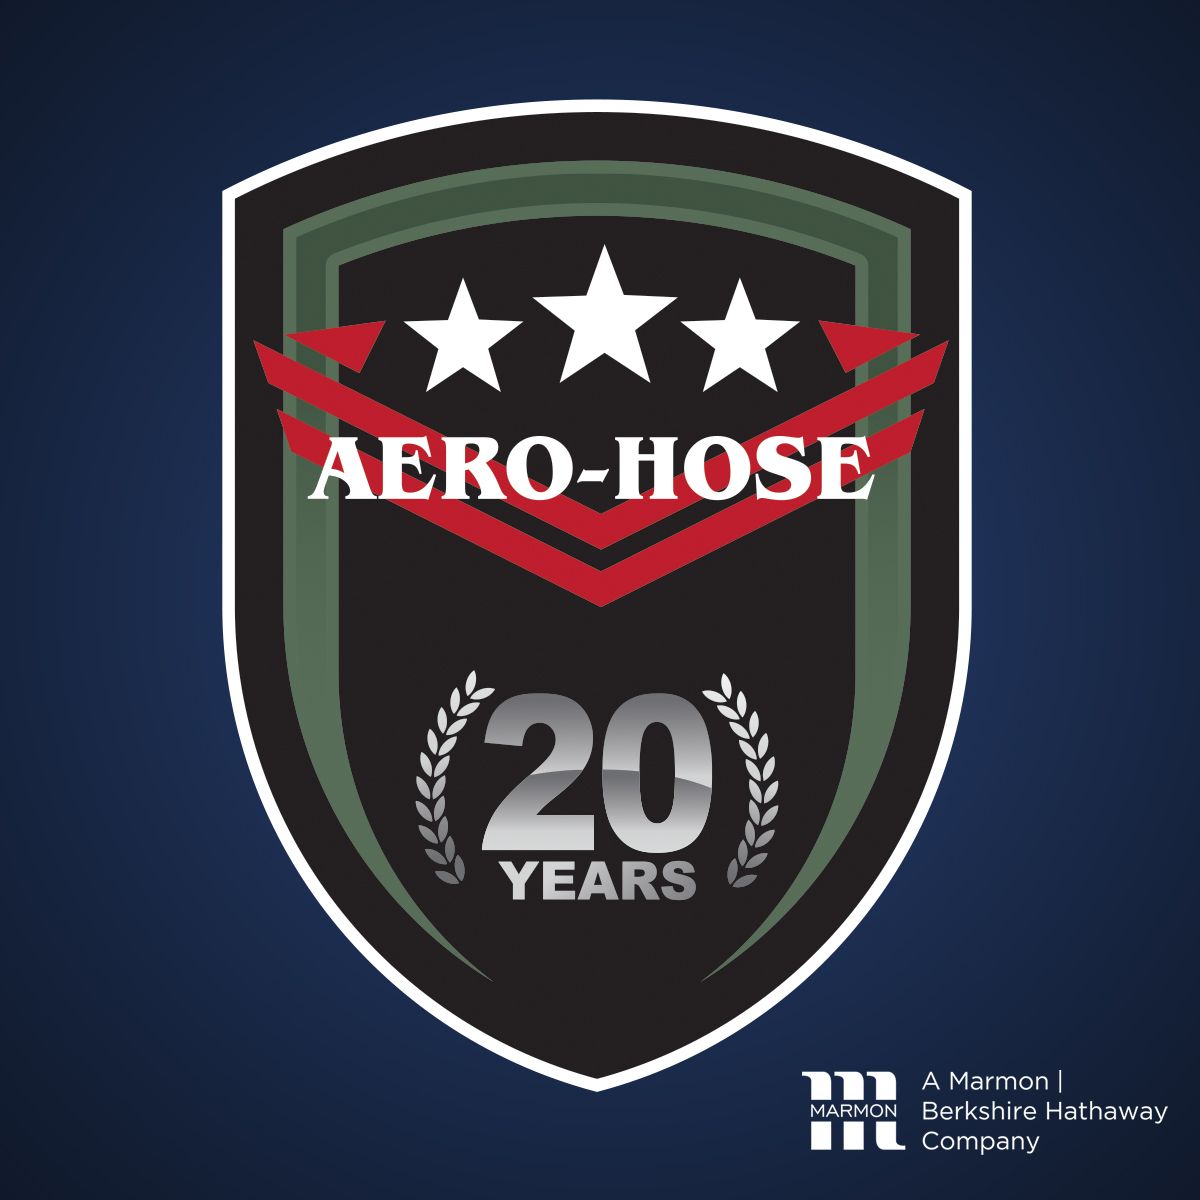 celebrating aero-hose's auto draft 20-year anniversary, the logo features three stars, two red chevrons, and laurel branches with "a marmon | berkshire hathaway company" text at the bottom right.